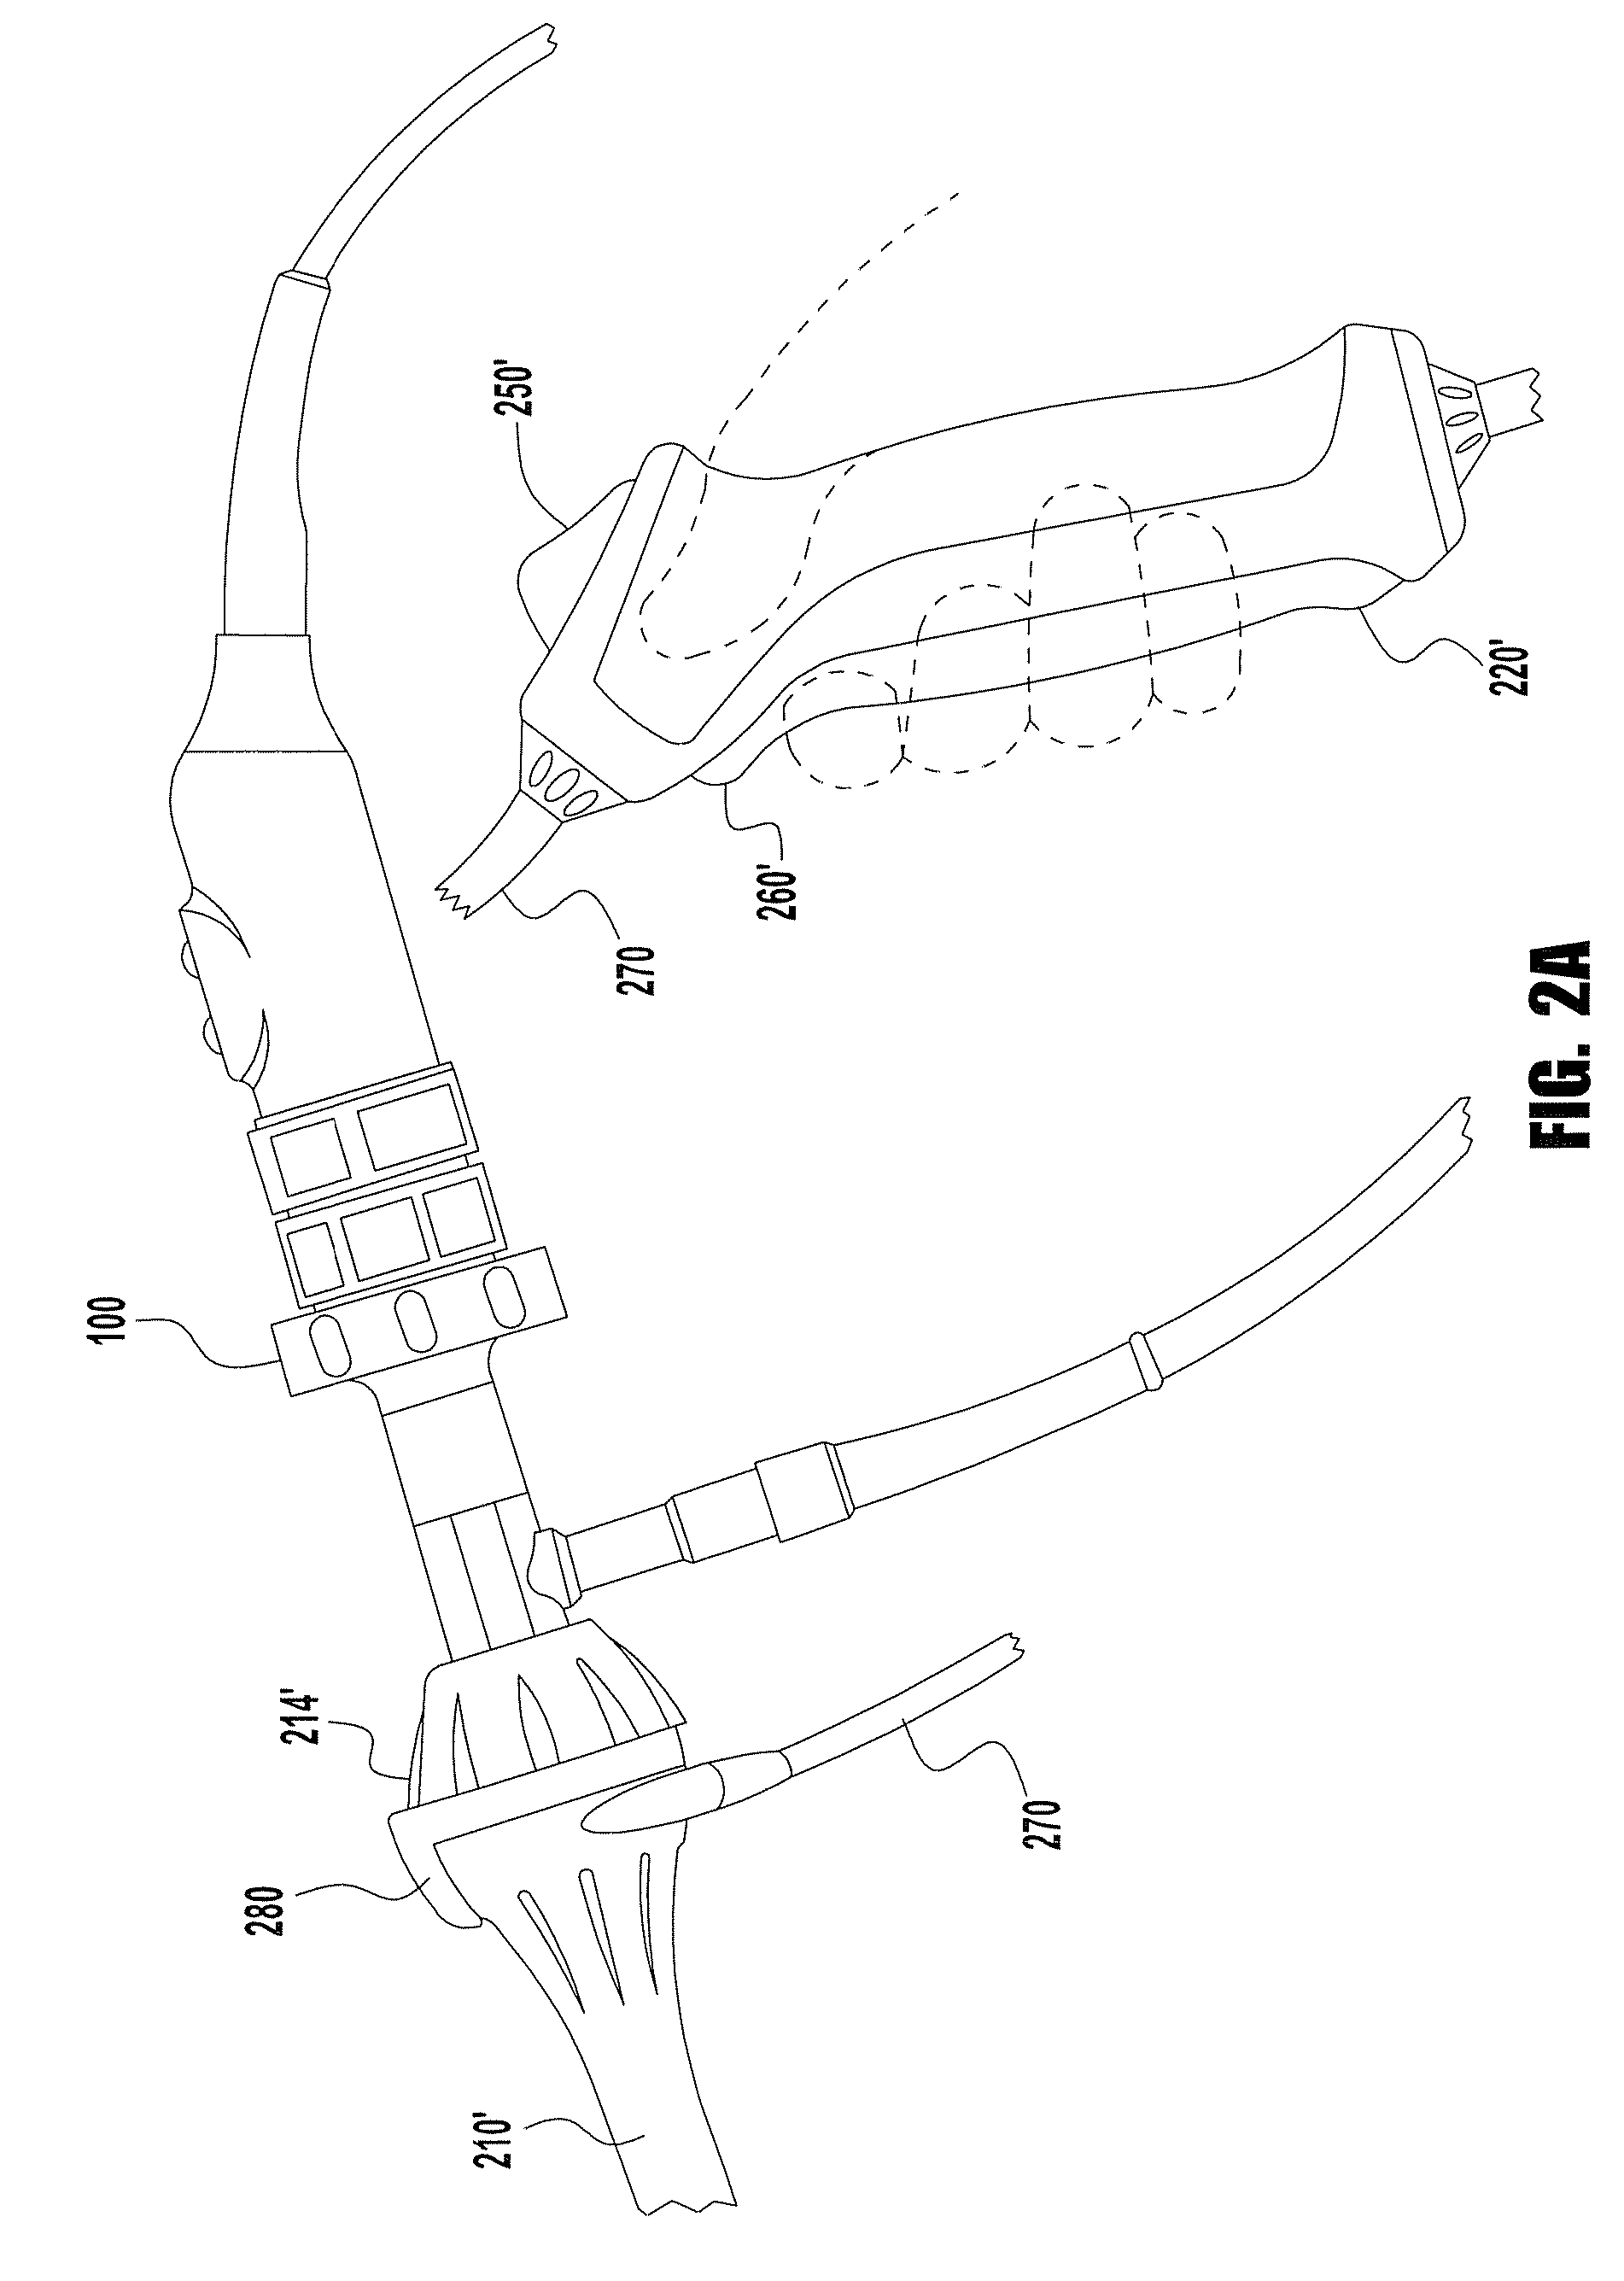 Device for maintaining visualization with surgical scopes